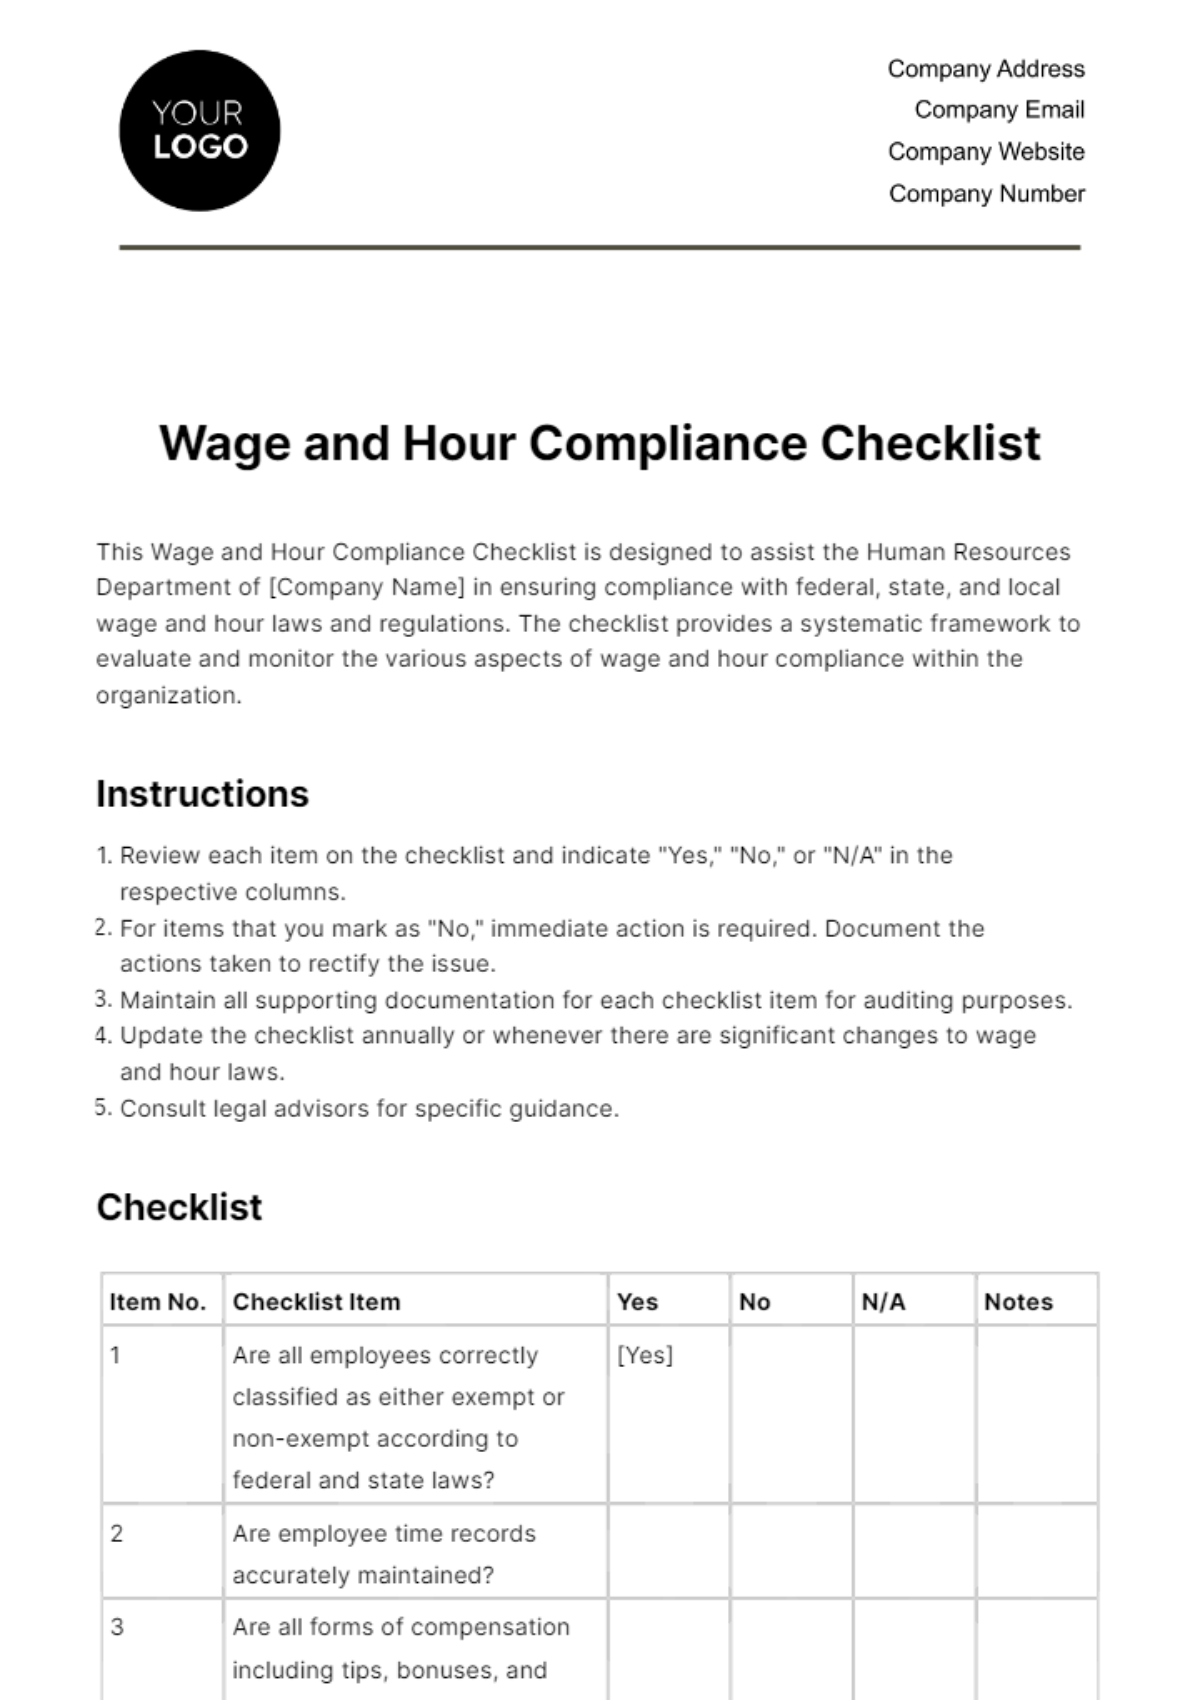 Wage and Hour Compliance Checklist HR Template